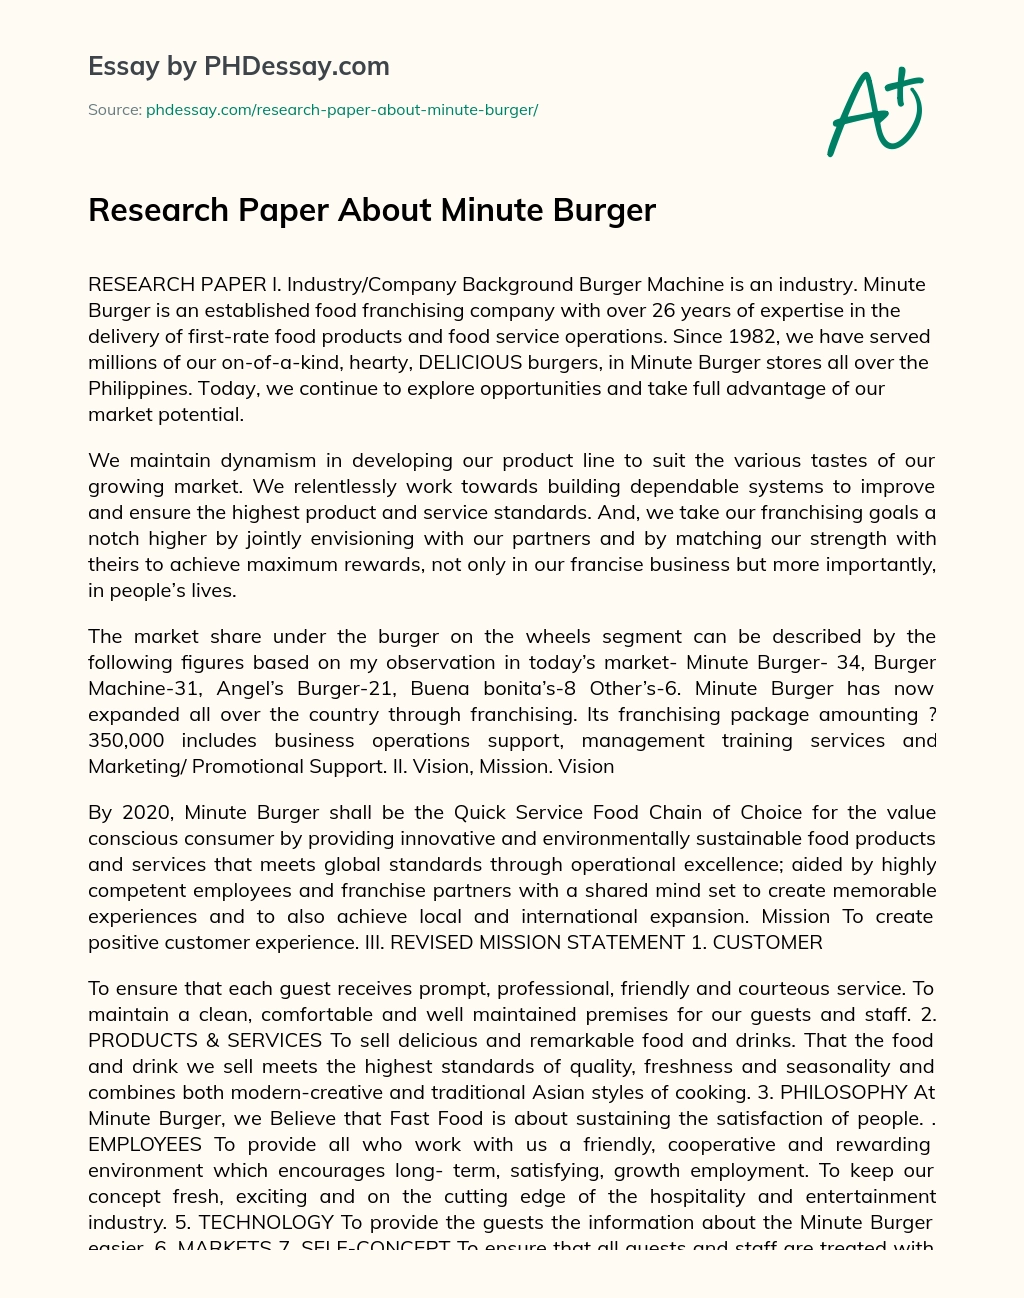 Research Paper About Minute Burger essay